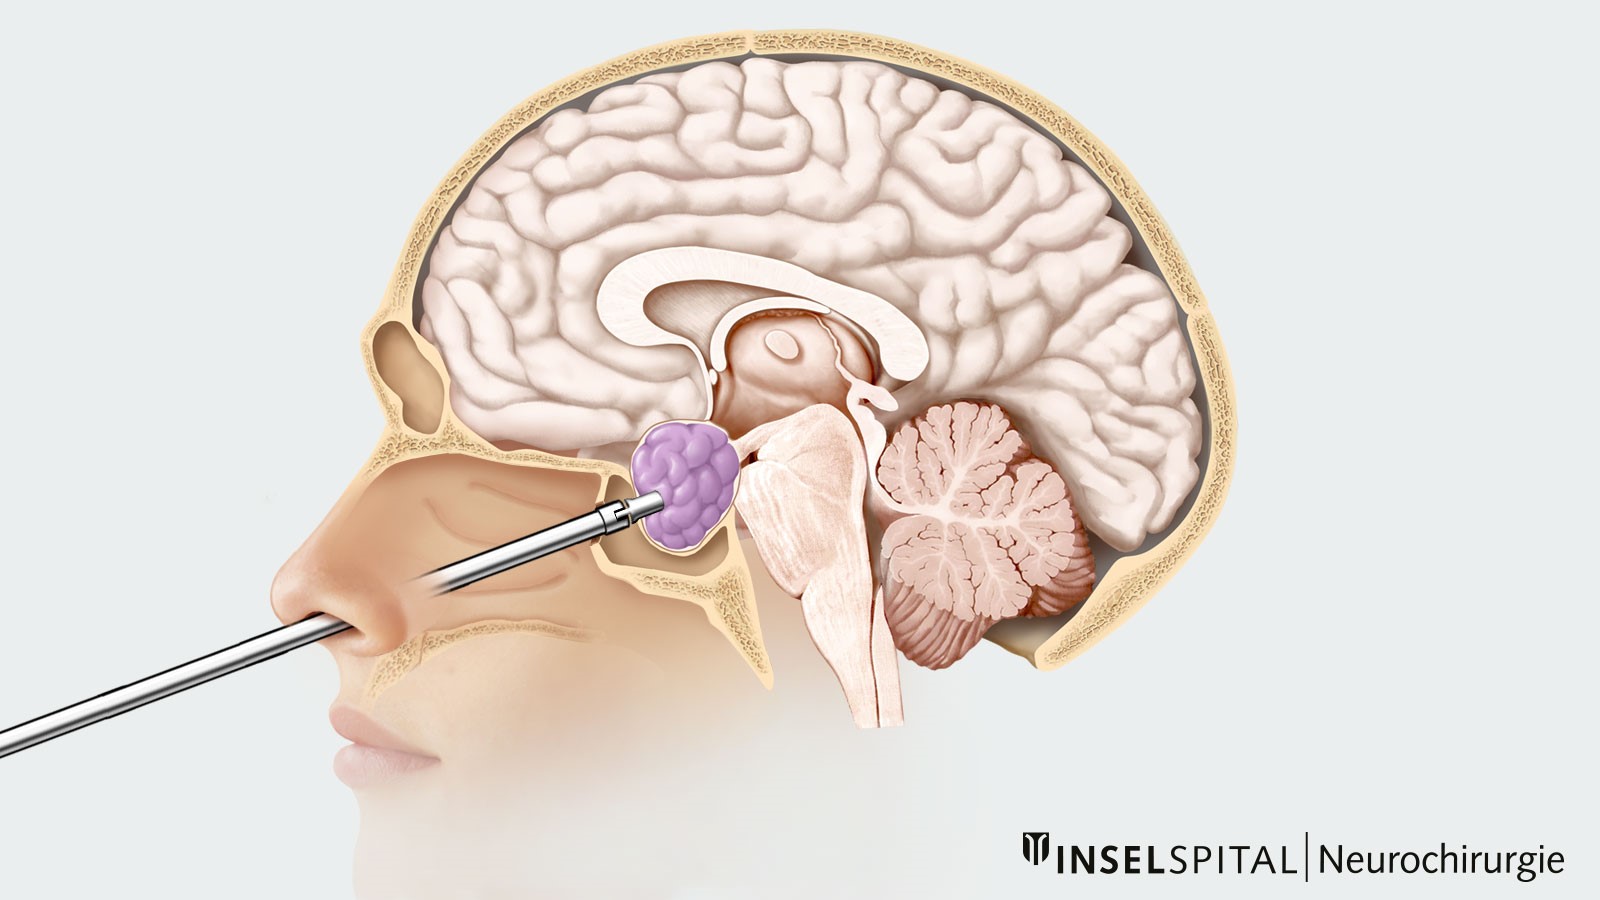 Color drawing for transnasal transsphenoidal approach via the nose to the pituitary adenoma